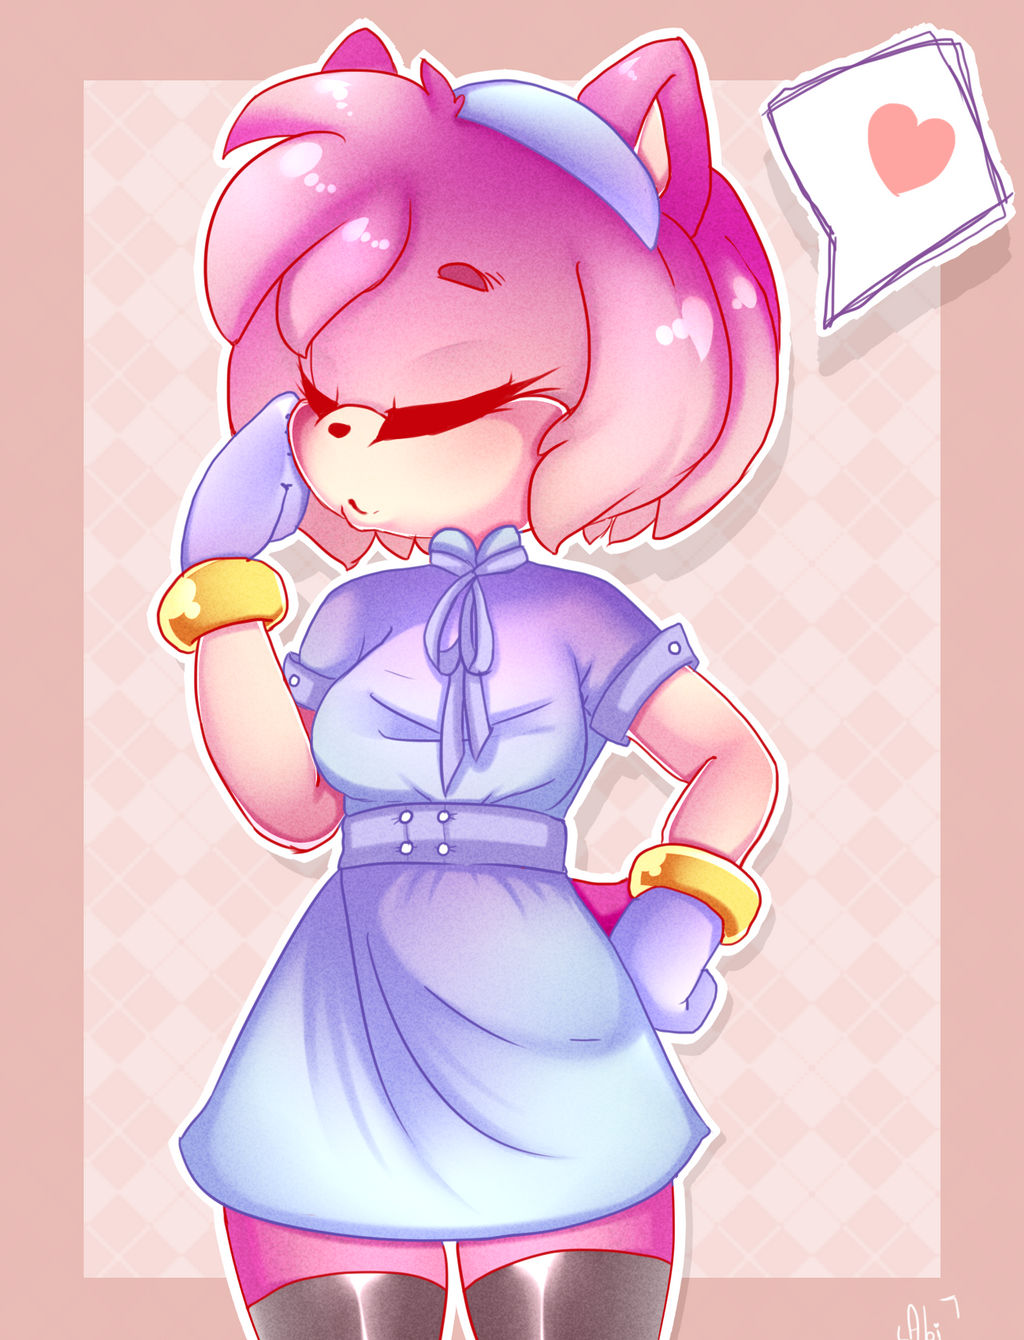 Collab Amy Rose By Mimiguerrero On Deviantart